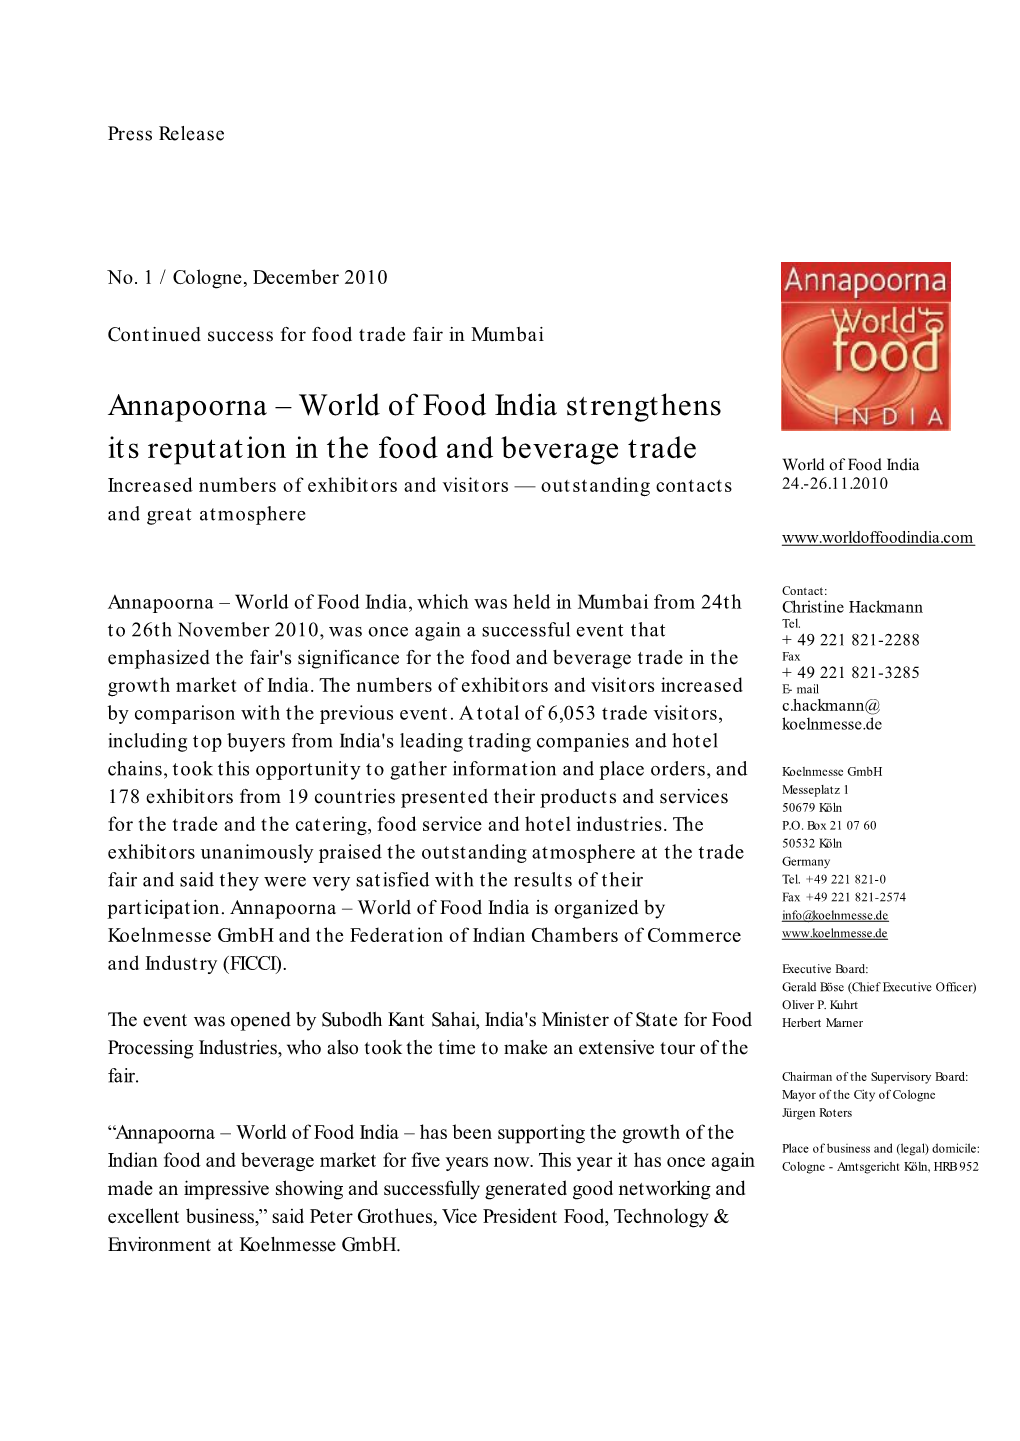 Annapoorna – World of Food India Strengthens Its Reputation in The